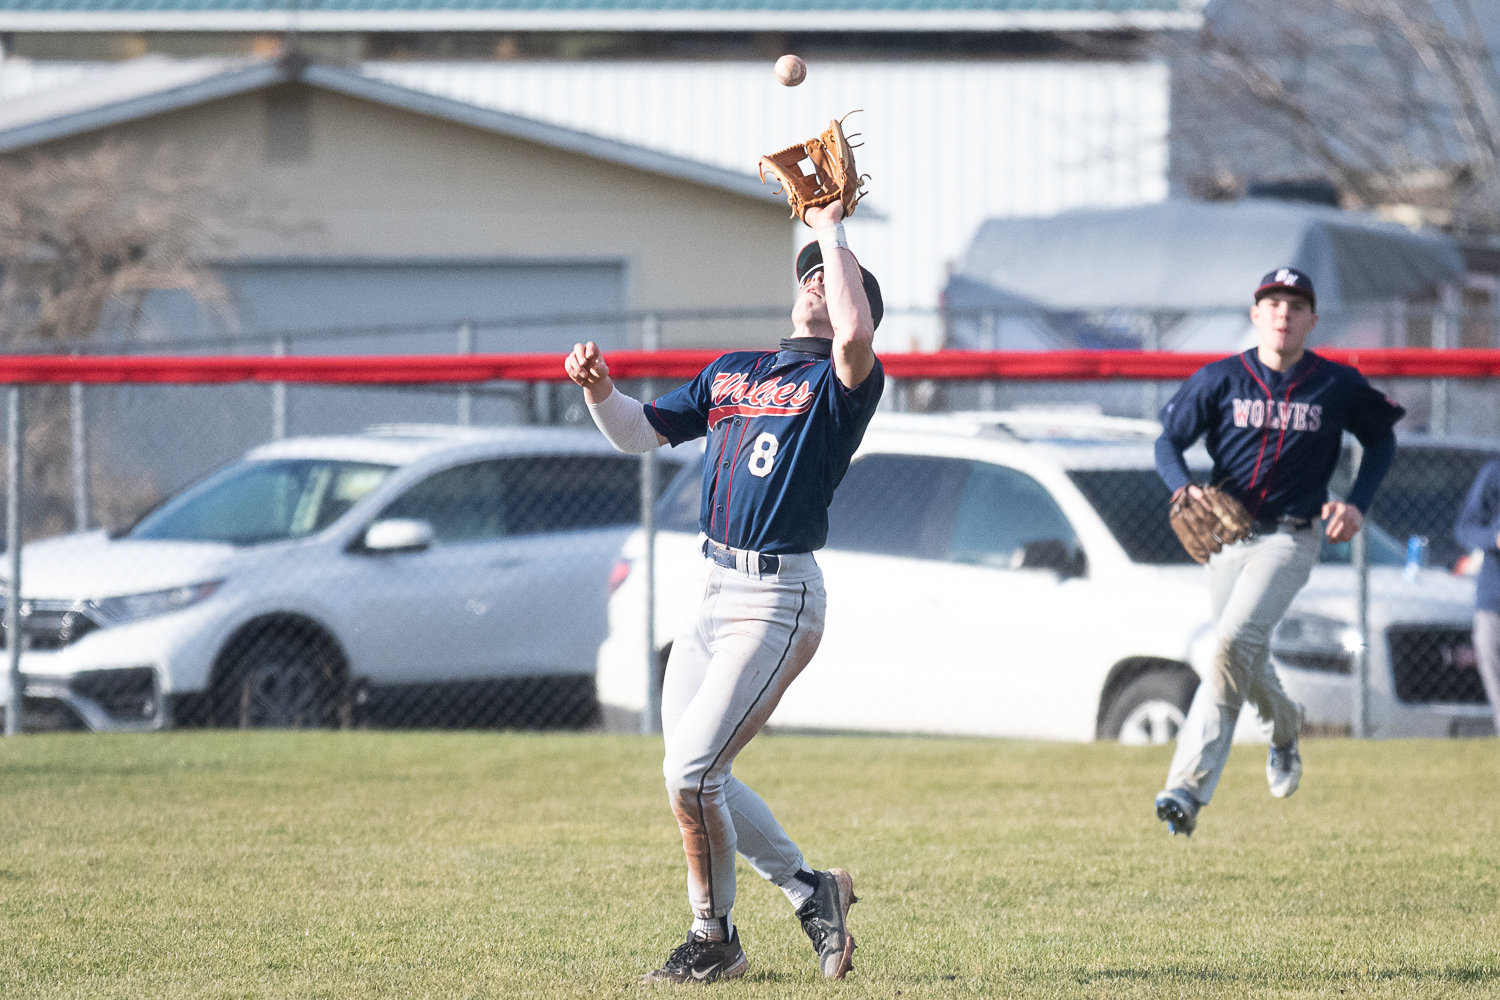 Braiden Bond caatches a pop-up during Black Hills' 7-4 loss at Tenino on March 14.